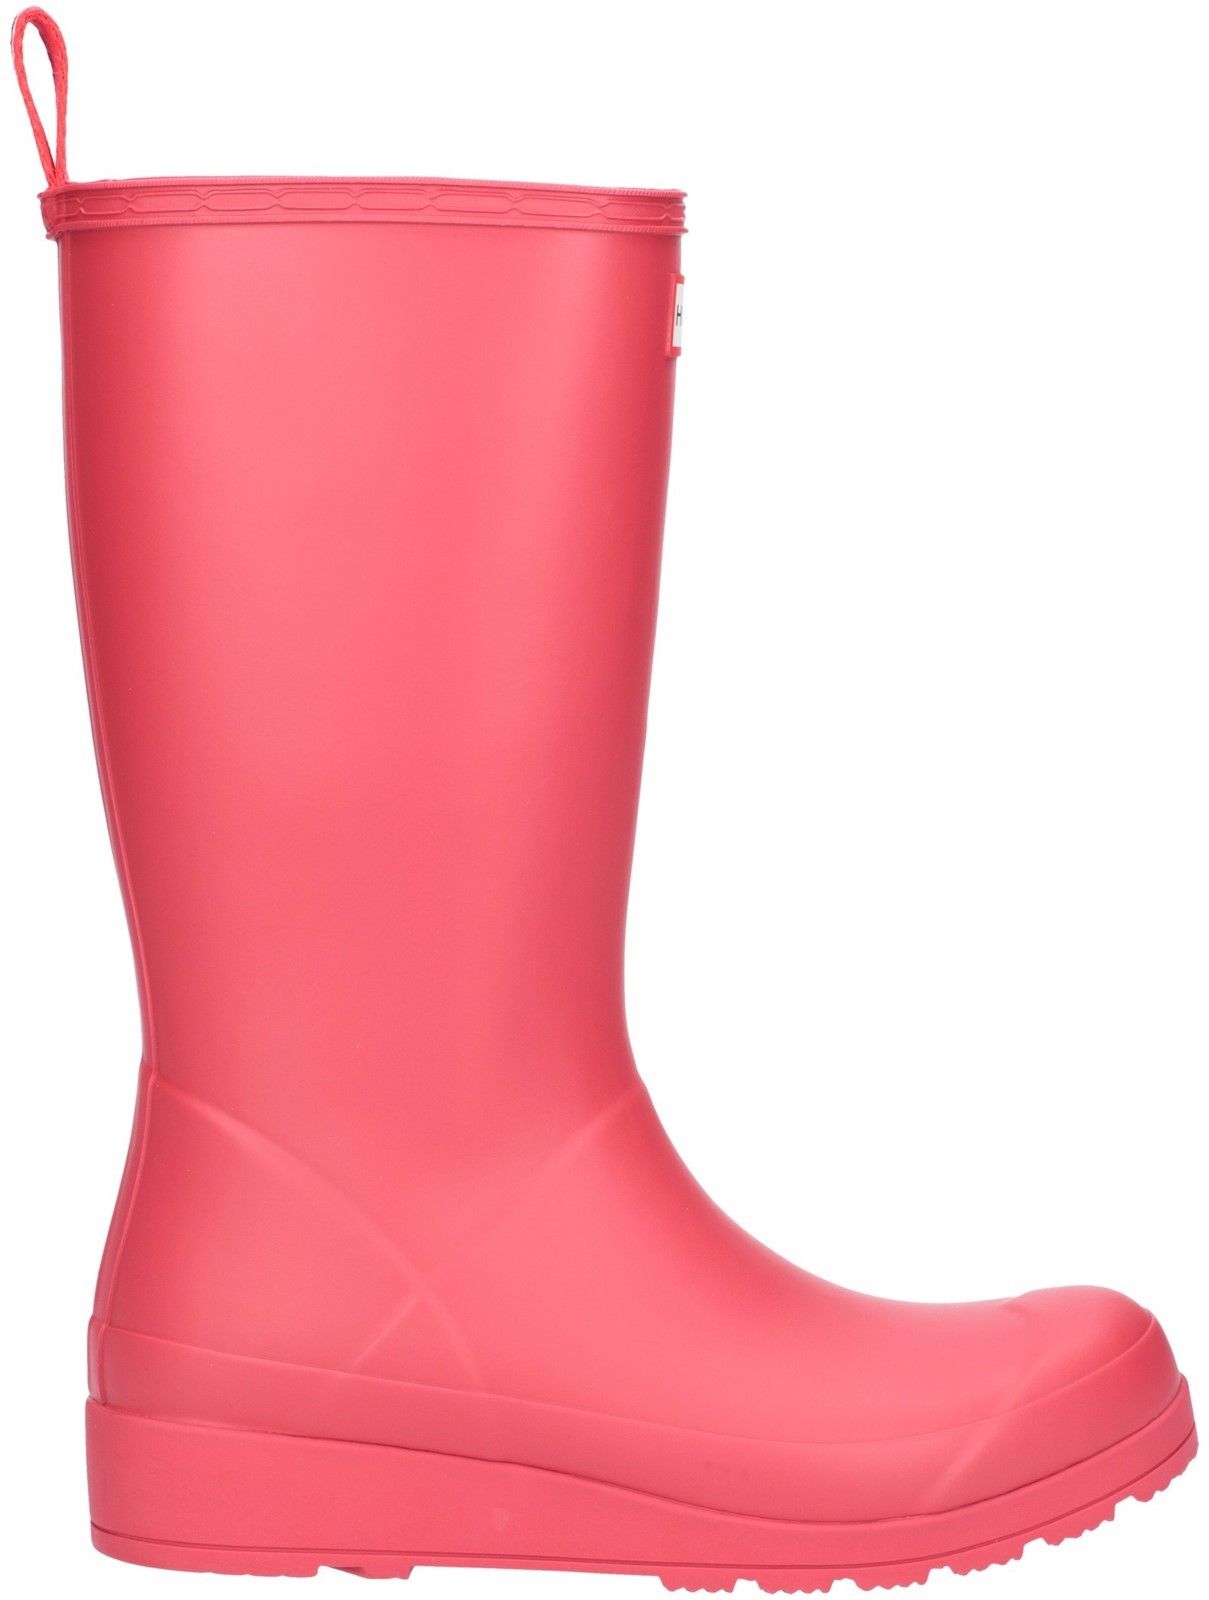 A new, versatile, lightweight, colourful and fully waterproof rain boot. Handcrafted from 10 individual parts, this new boot is a simplification of the Hunter Original design, retaining the most iconic elements of the classic Original Tall Boot. Features a pull tab at the heel for ease of foot entry. Perfect for festivals.